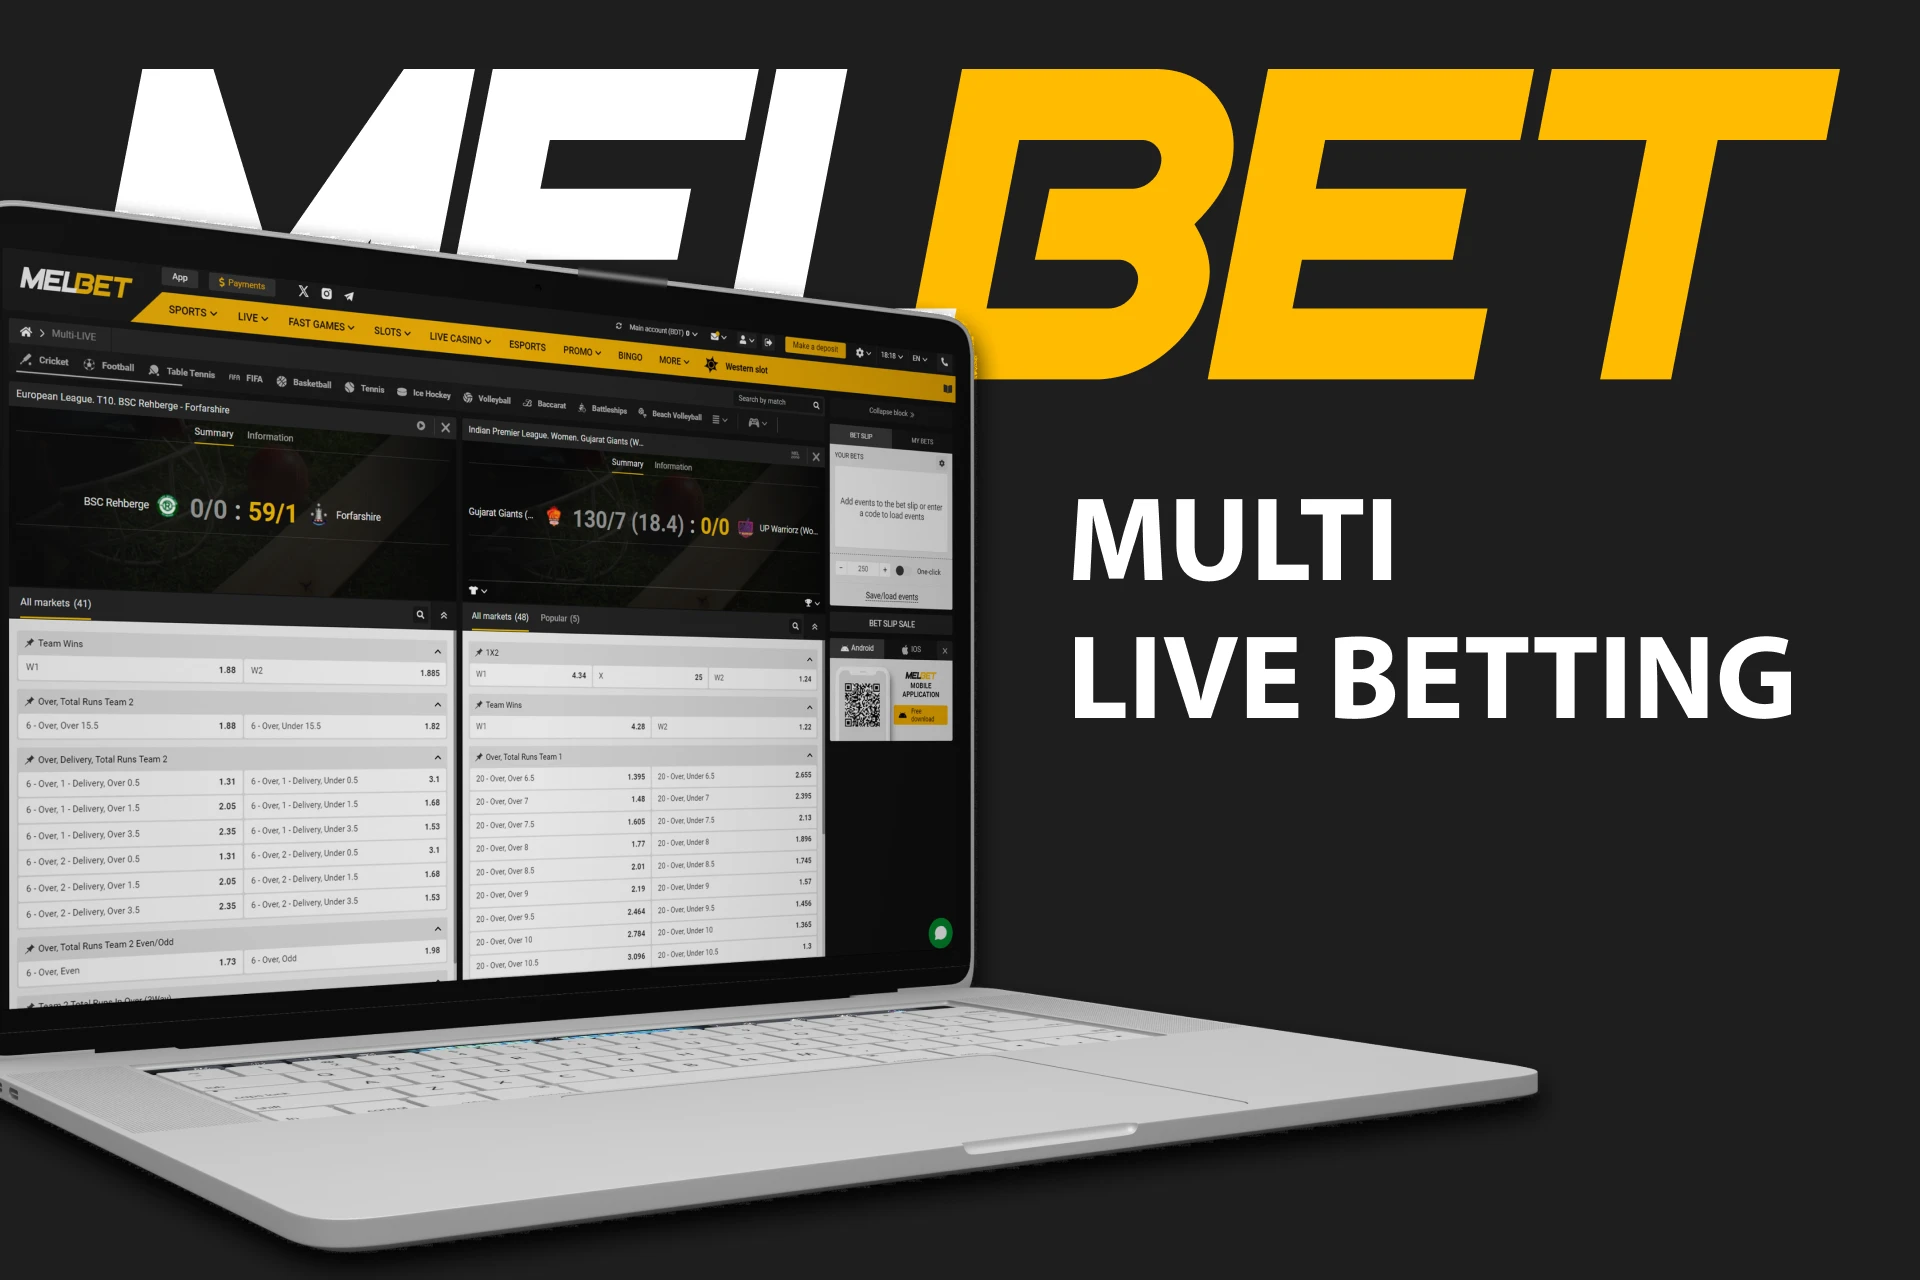 Place bets on sporting events at the same time by going to the Melbet Multi Live page.